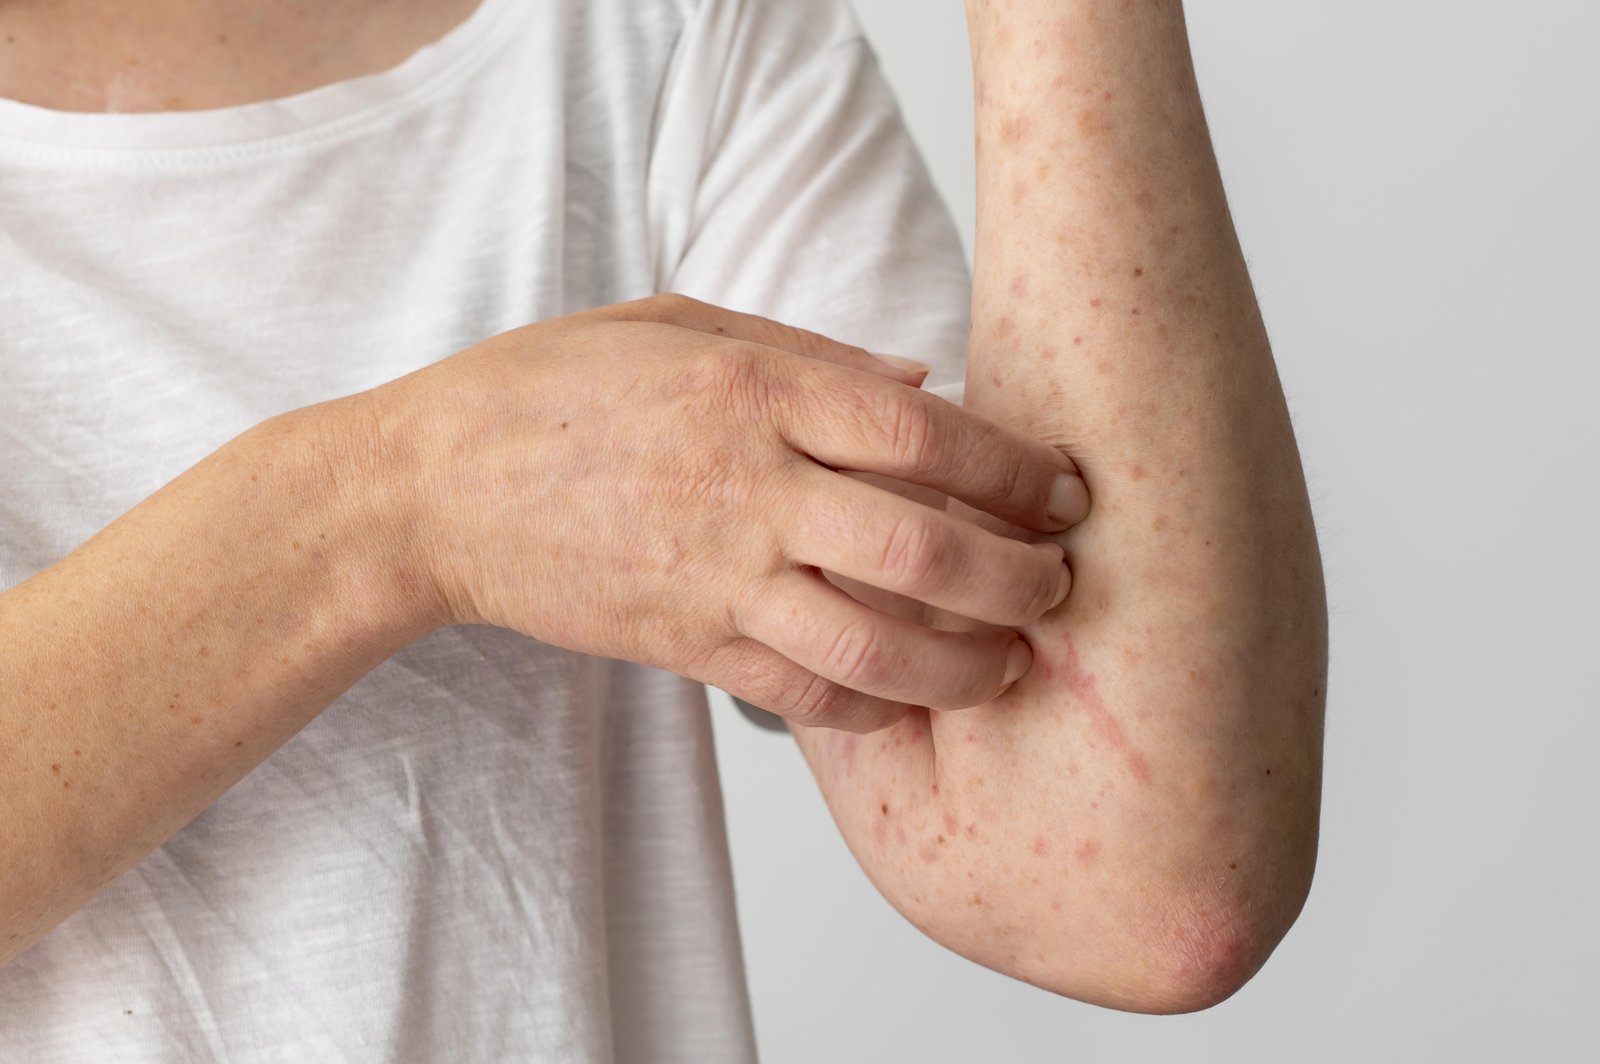 Vulnerability To Stress In Adolescence Raises Men’s Risk Of Psoriasis Later: Study